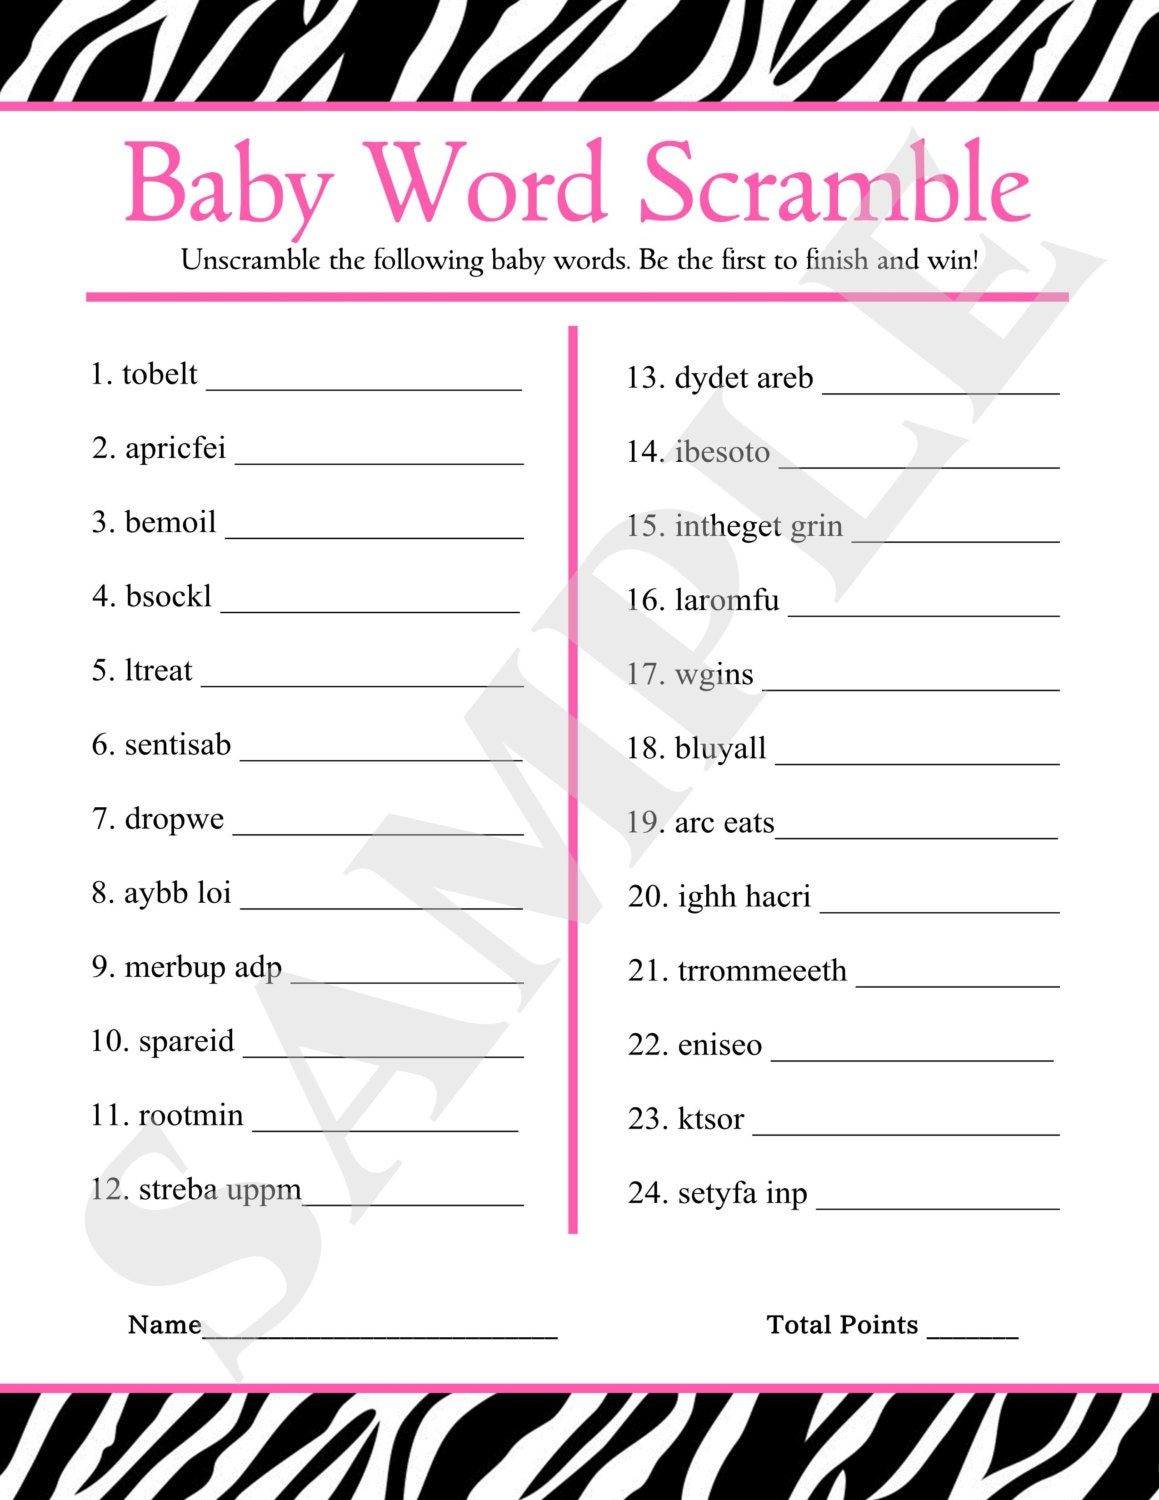 Instant Download Printable Baby Word Scramble by jessica91582